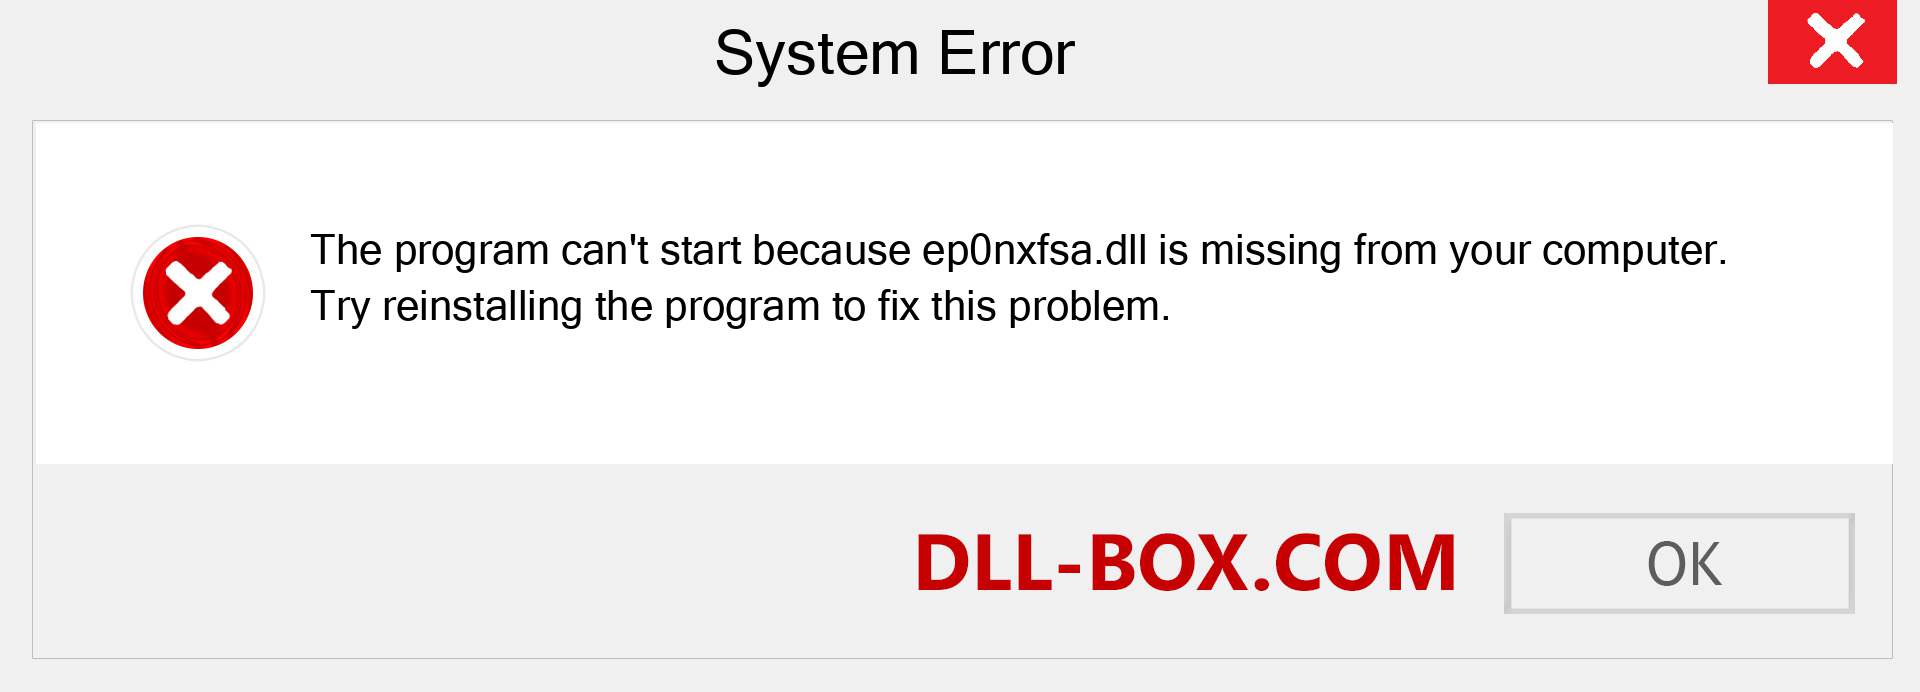  ep0nxfsa.dll file is missing?. Download for Windows 7, 8, 10 - Fix  ep0nxfsa dll Missing Error on Windows, photos, images